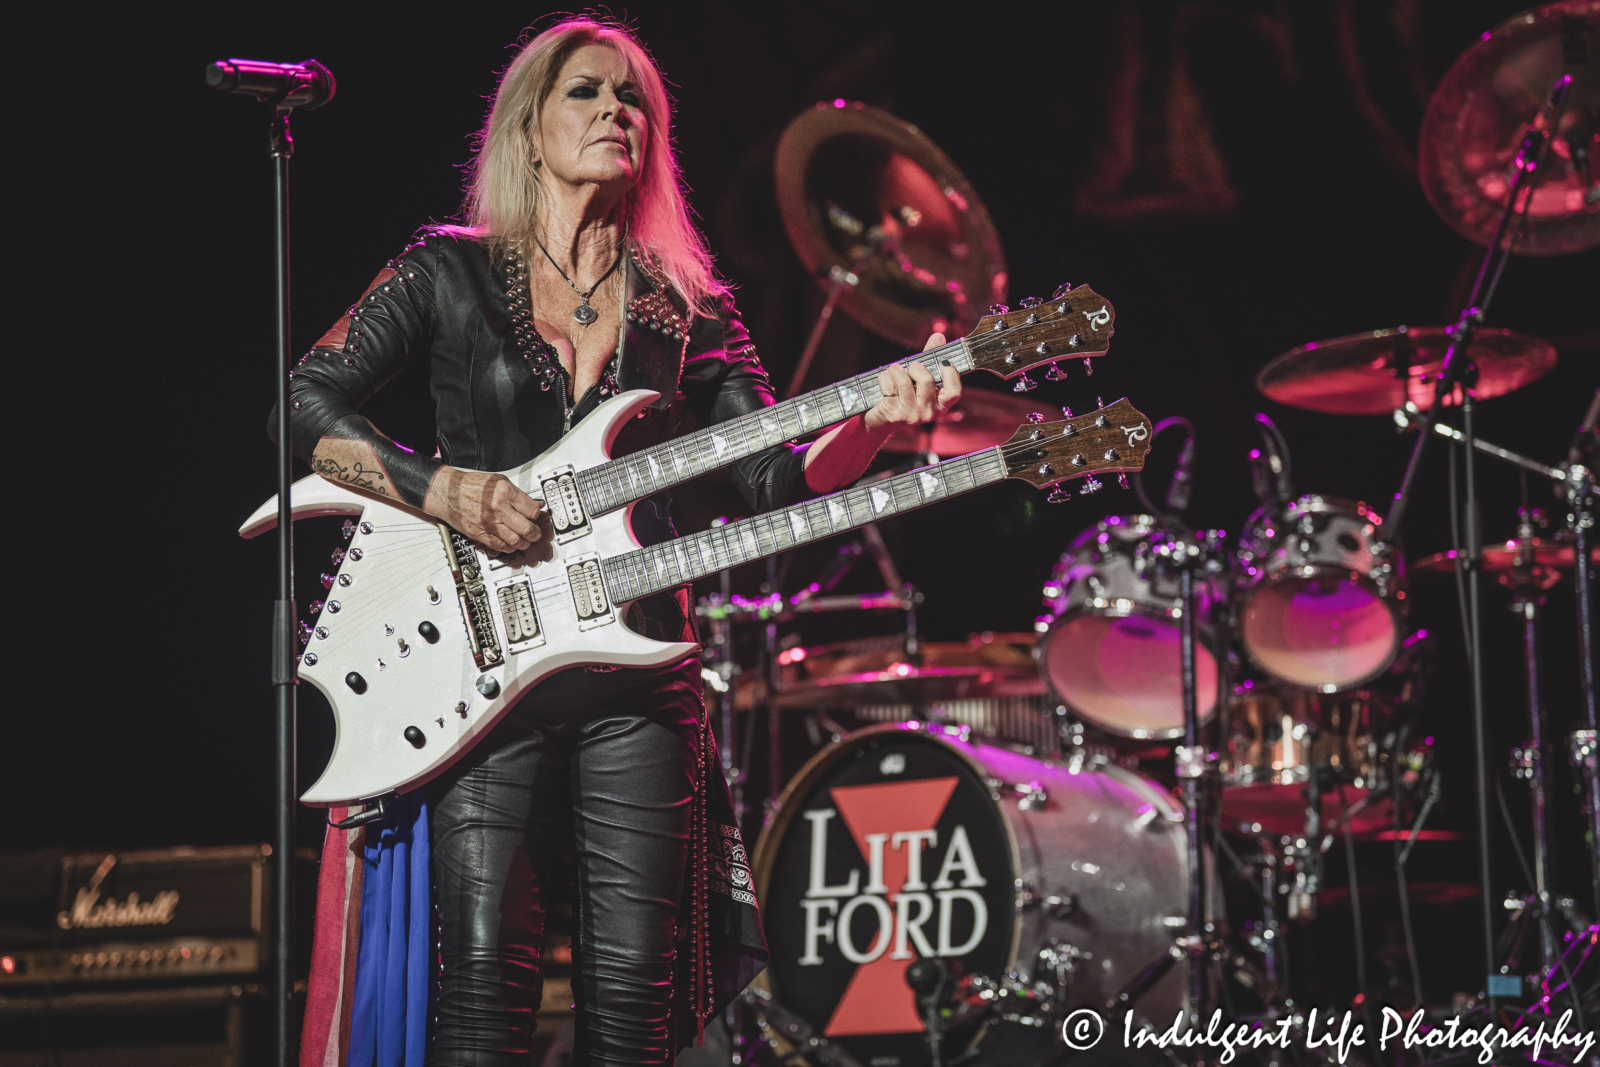 Guitar player Lita Ford performing live at Hy-Vee Arena in Kansas City, MO on March 22, 2024.